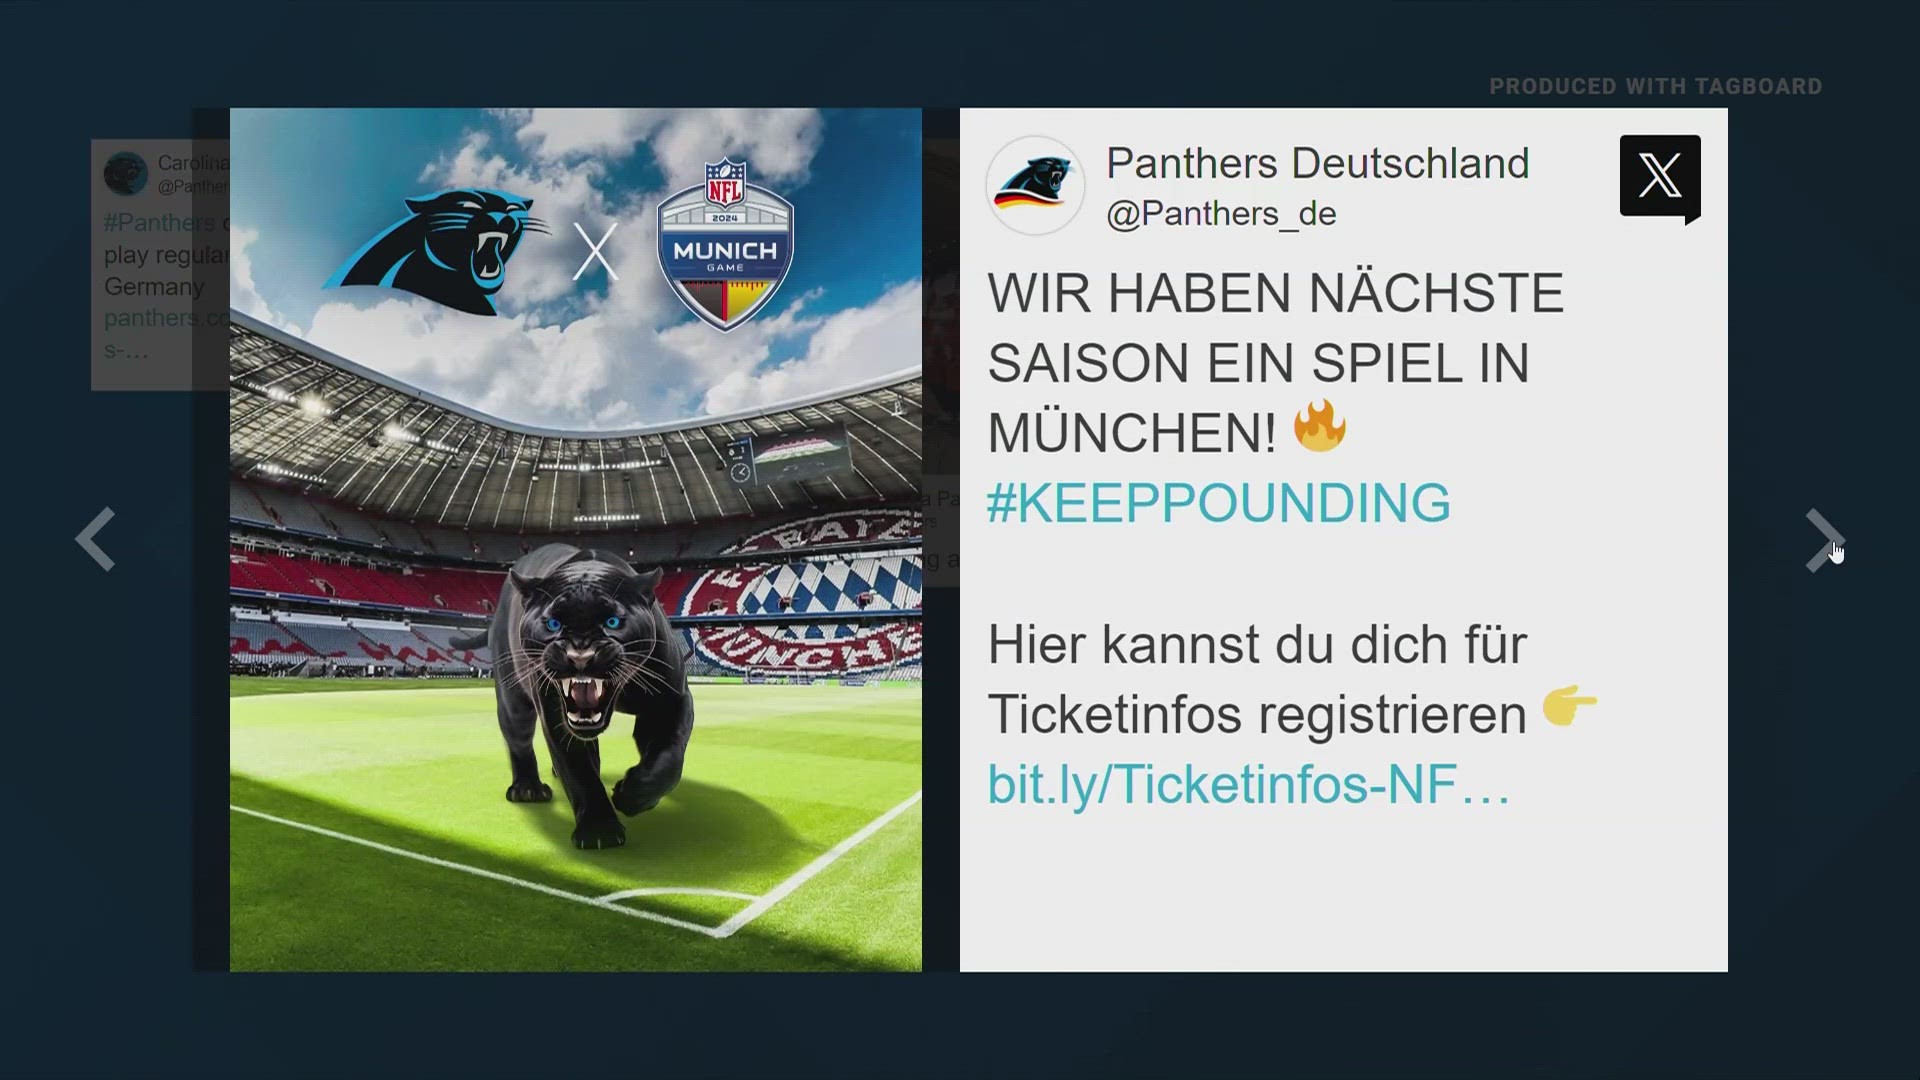 The Carolina Panthers will play a game in Munich, Germany next season.